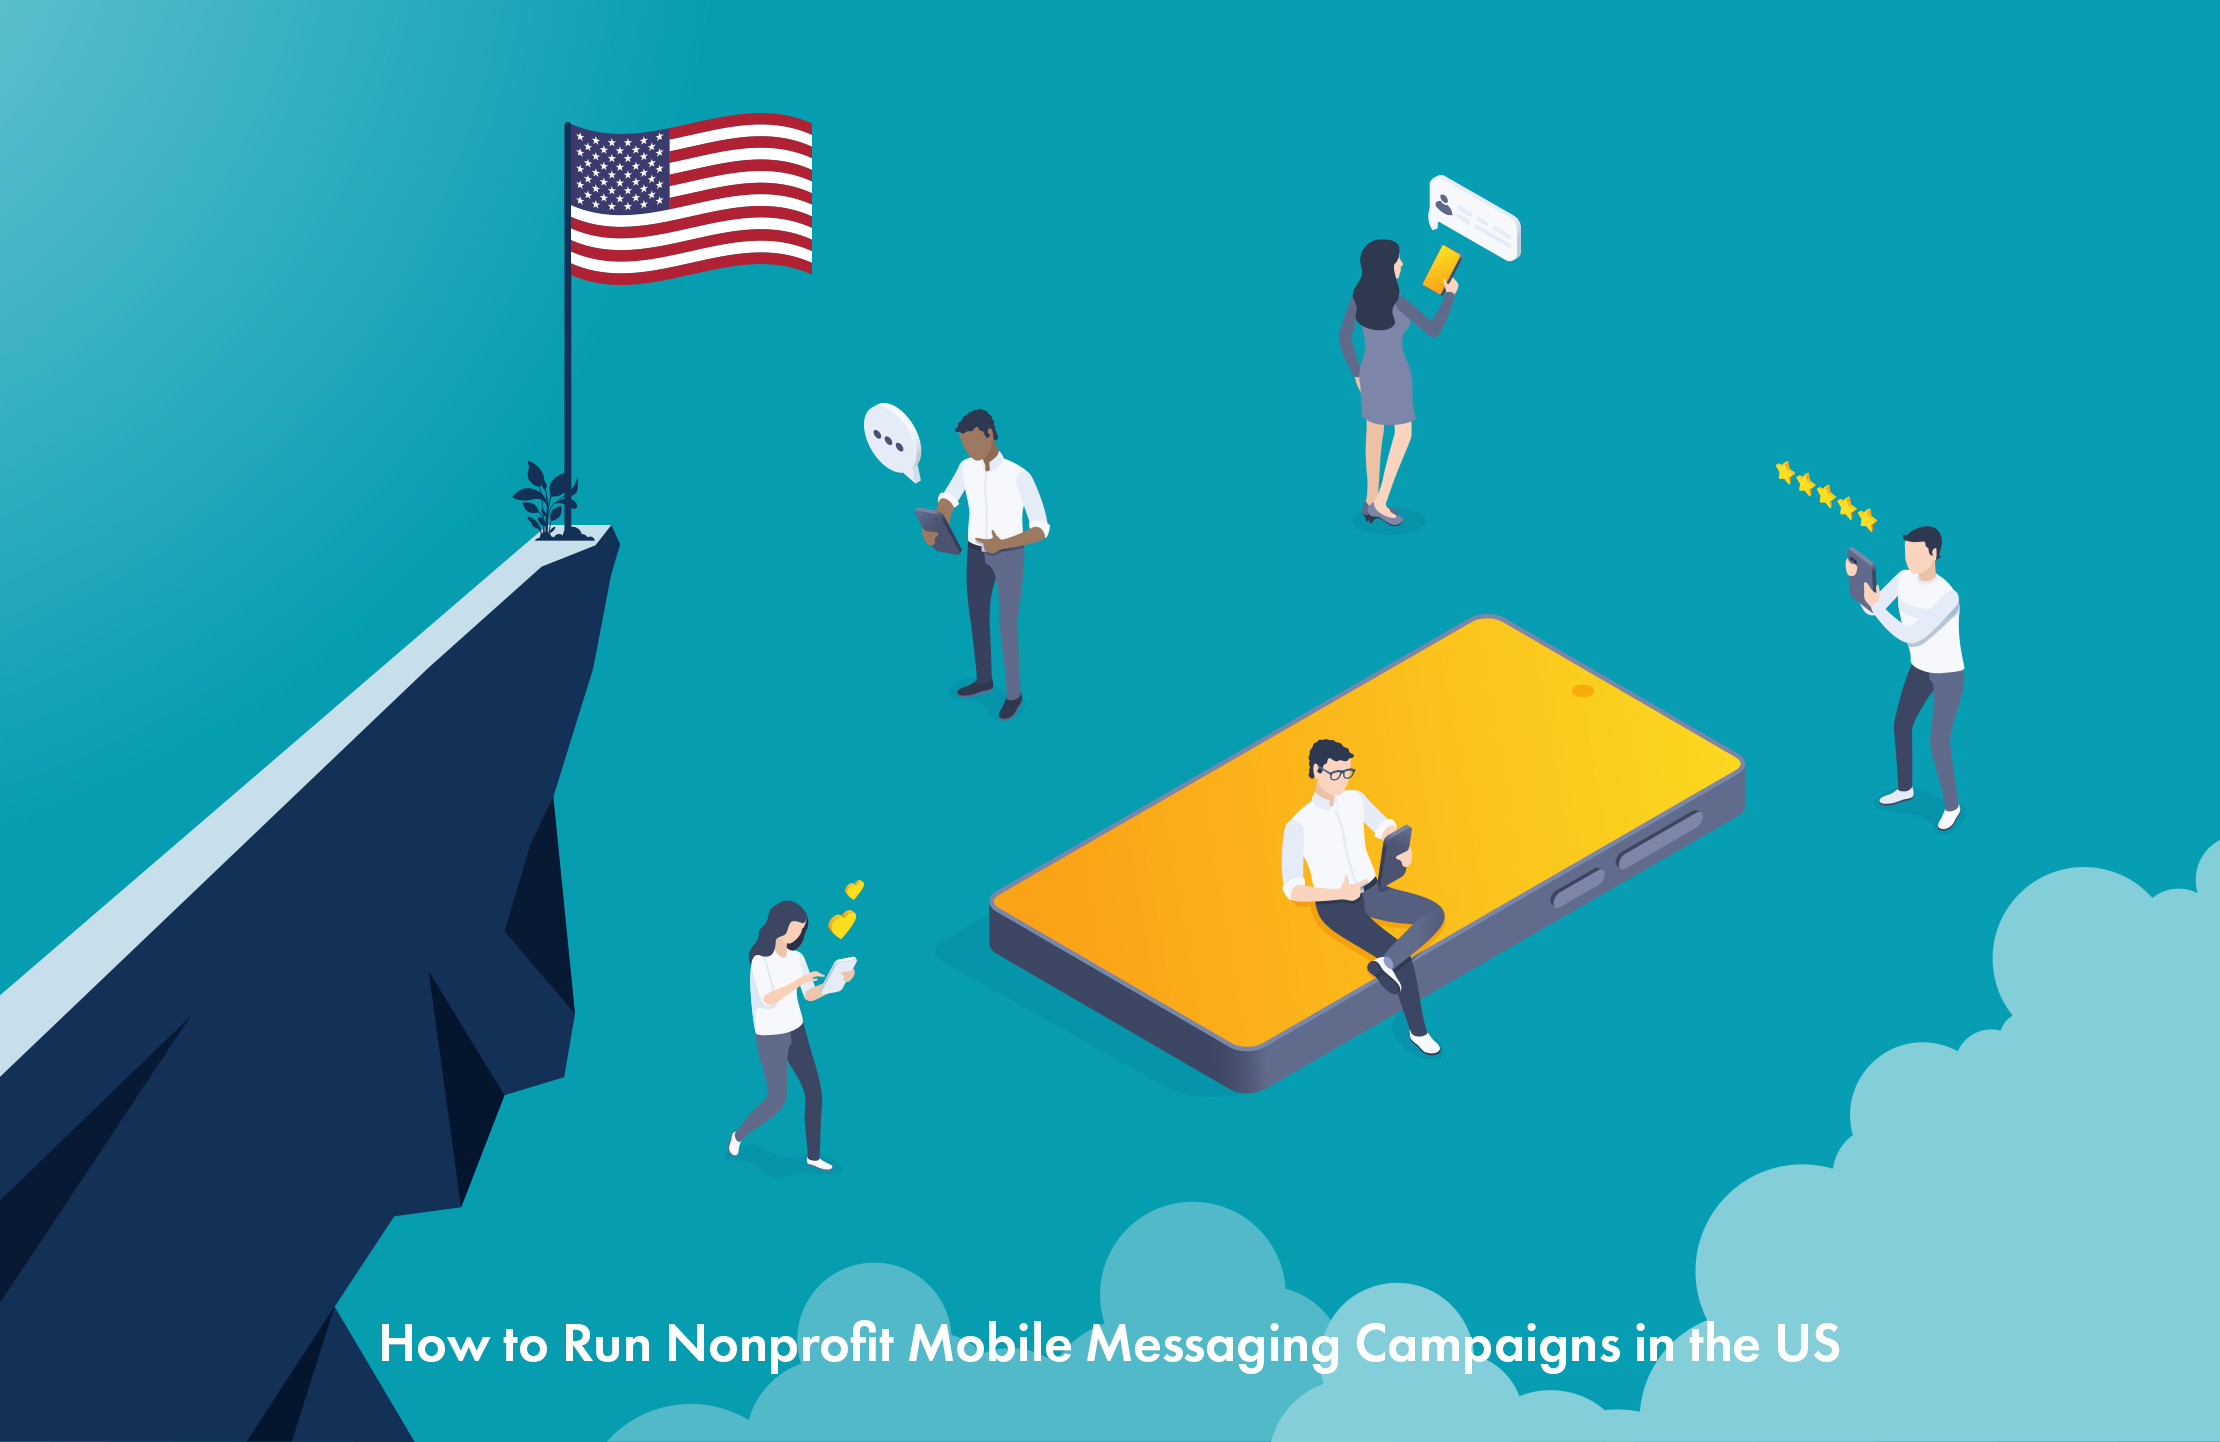 How-to-Run-Nonprofit-Mobile-Messaging-Campaigns-in-the-US